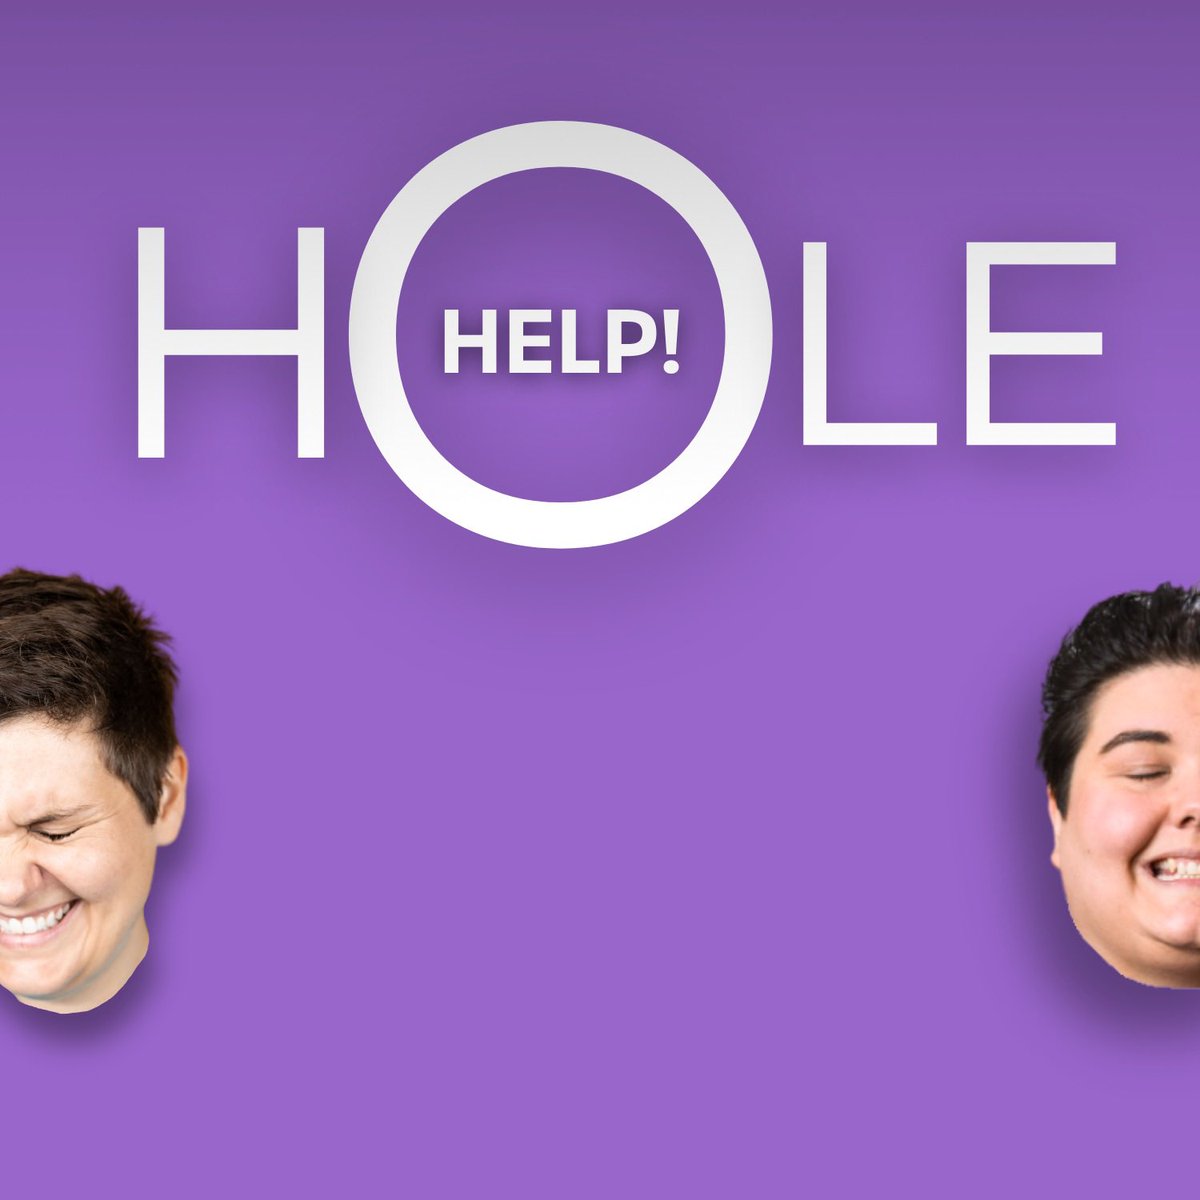 🚨NEW PODCAST🚨 Listen to Help Hole wherever you get your podcasts. @AbbyWambaugh and I read self-help books and talk about them. helphole.com